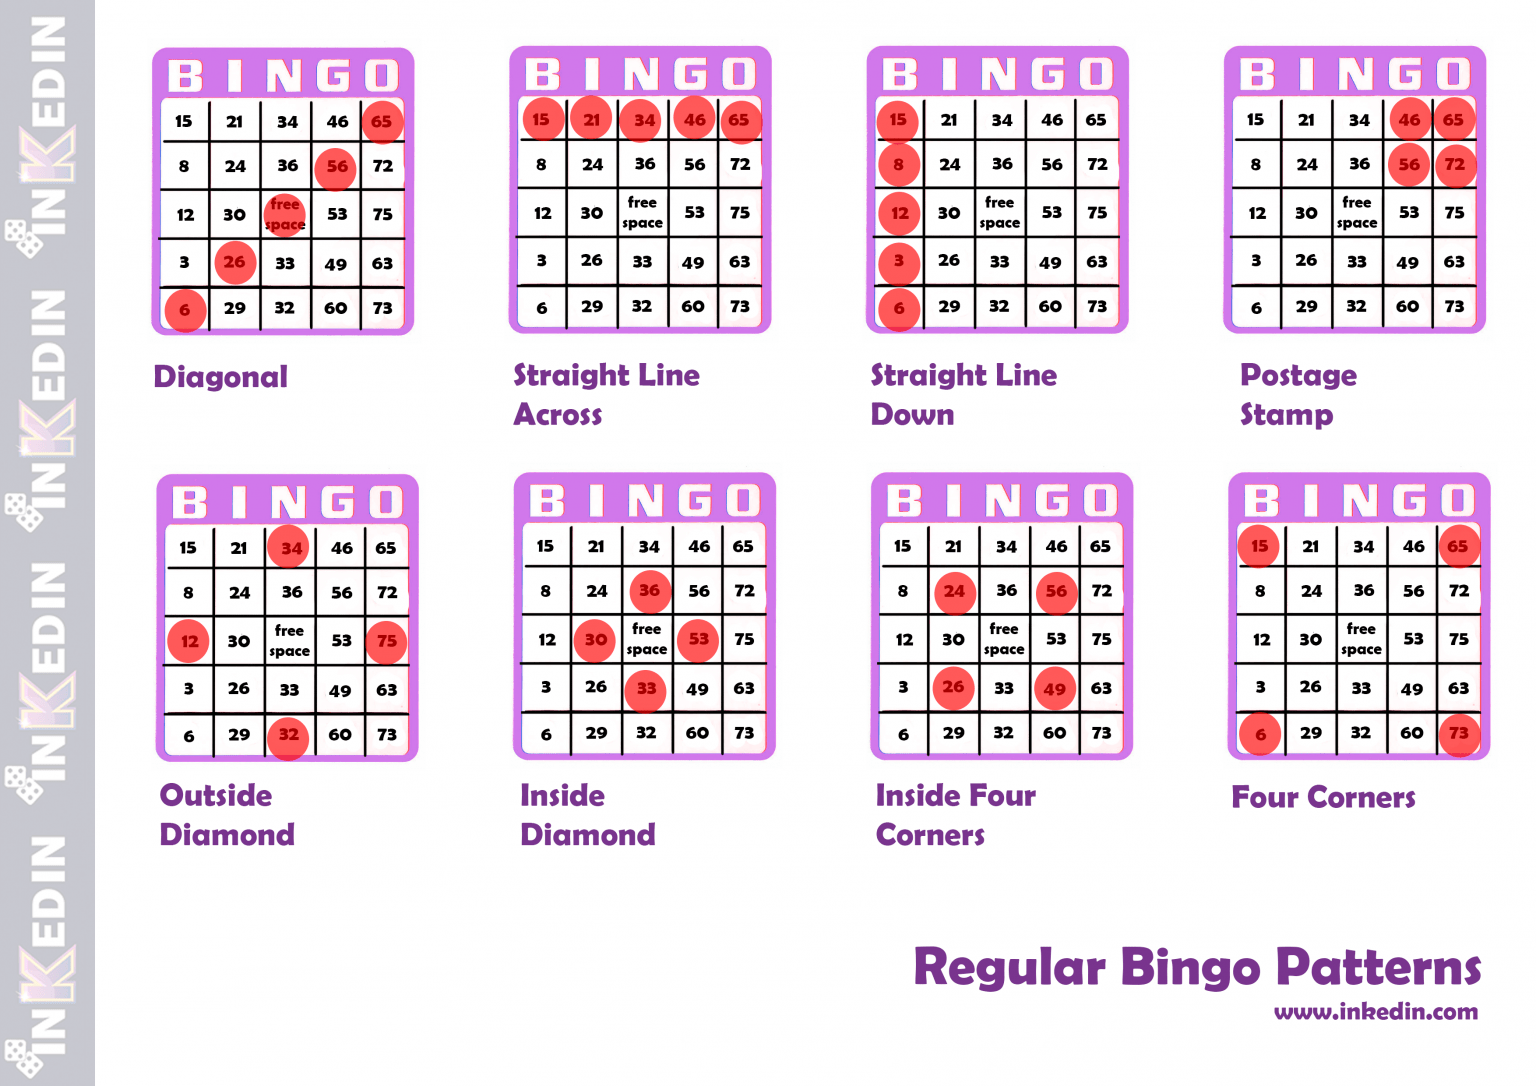 How To Play Bingo | The Ultimate Guide For Beginners To Learn!